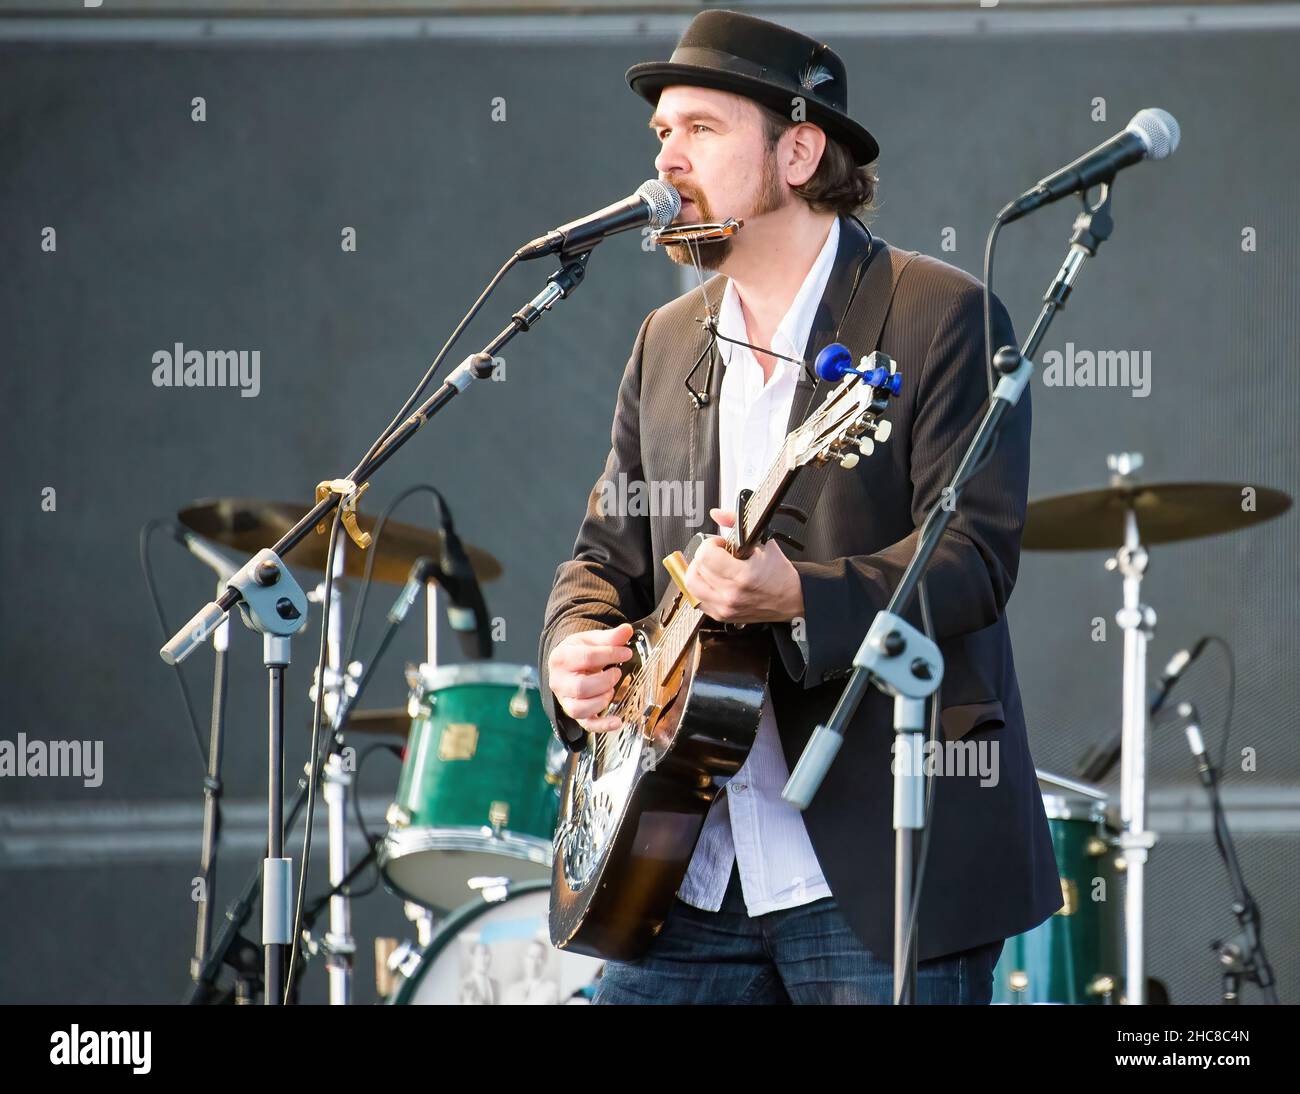 Toronto, Canada - July 1, 2015: Arthur Renwick, a First Nation artist performs open air in the Westjest stage in Toronto's Harborfront during Canada's Stock Photo